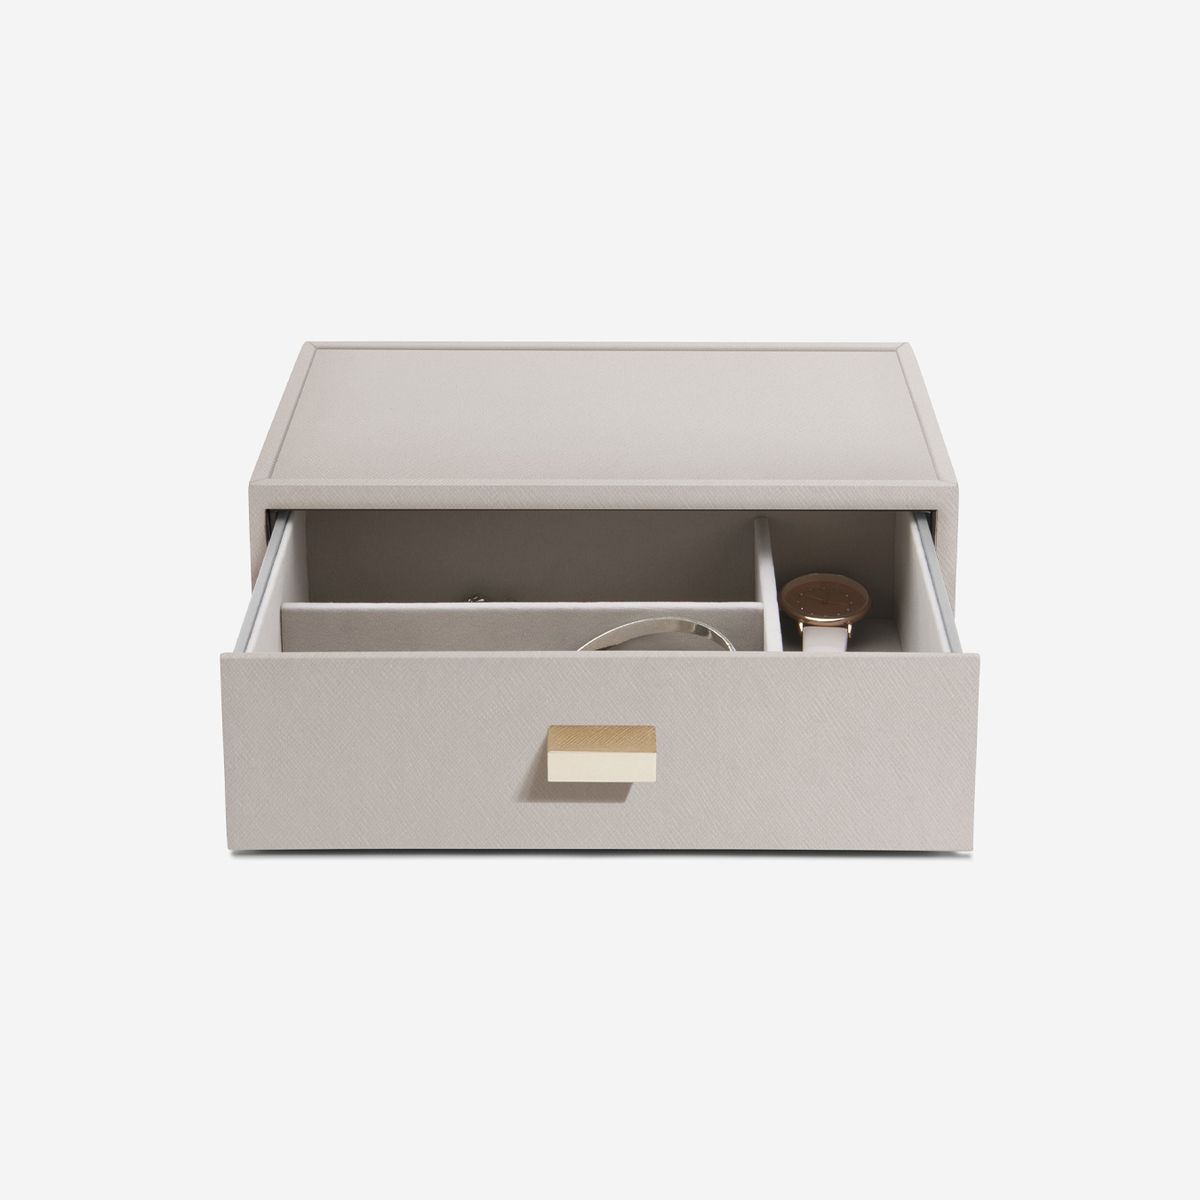 Stackers Classic Jewelry Box Collection | The Container Store